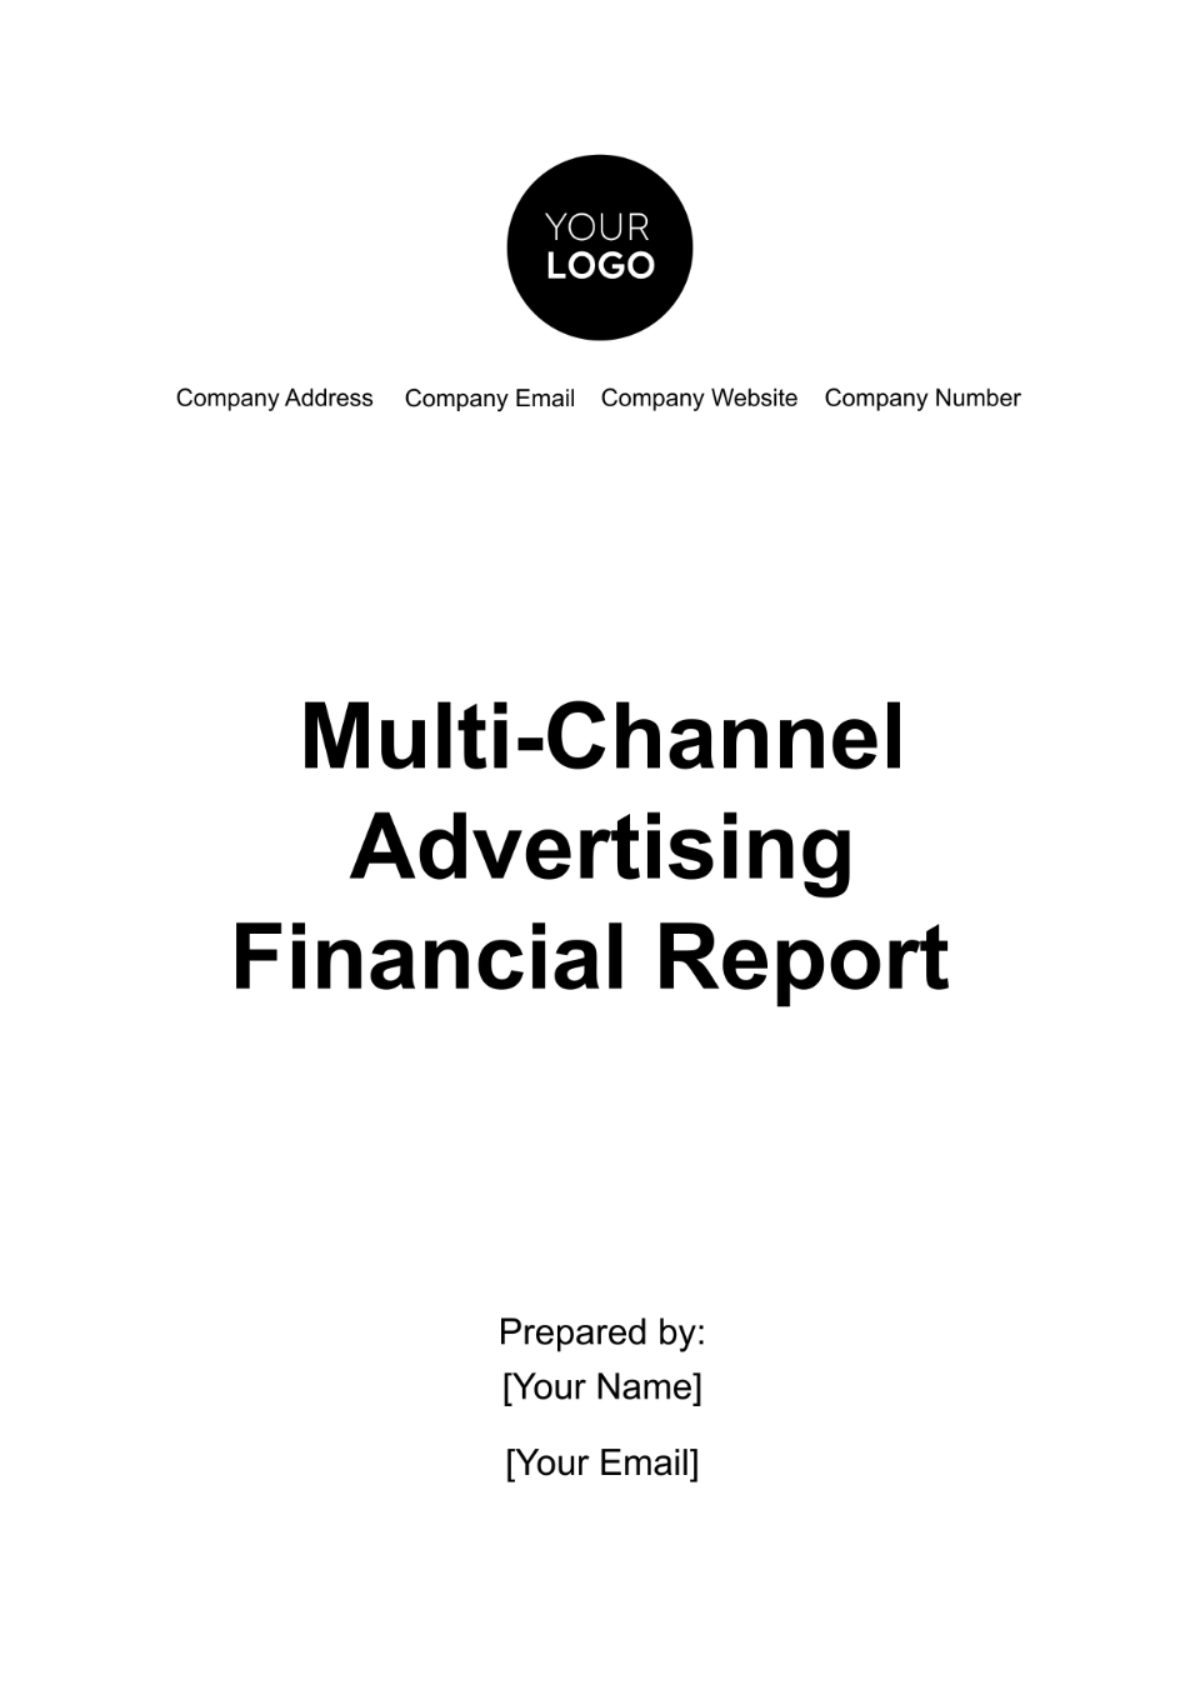 Free Multi-Channel Advertising Financial Report Template